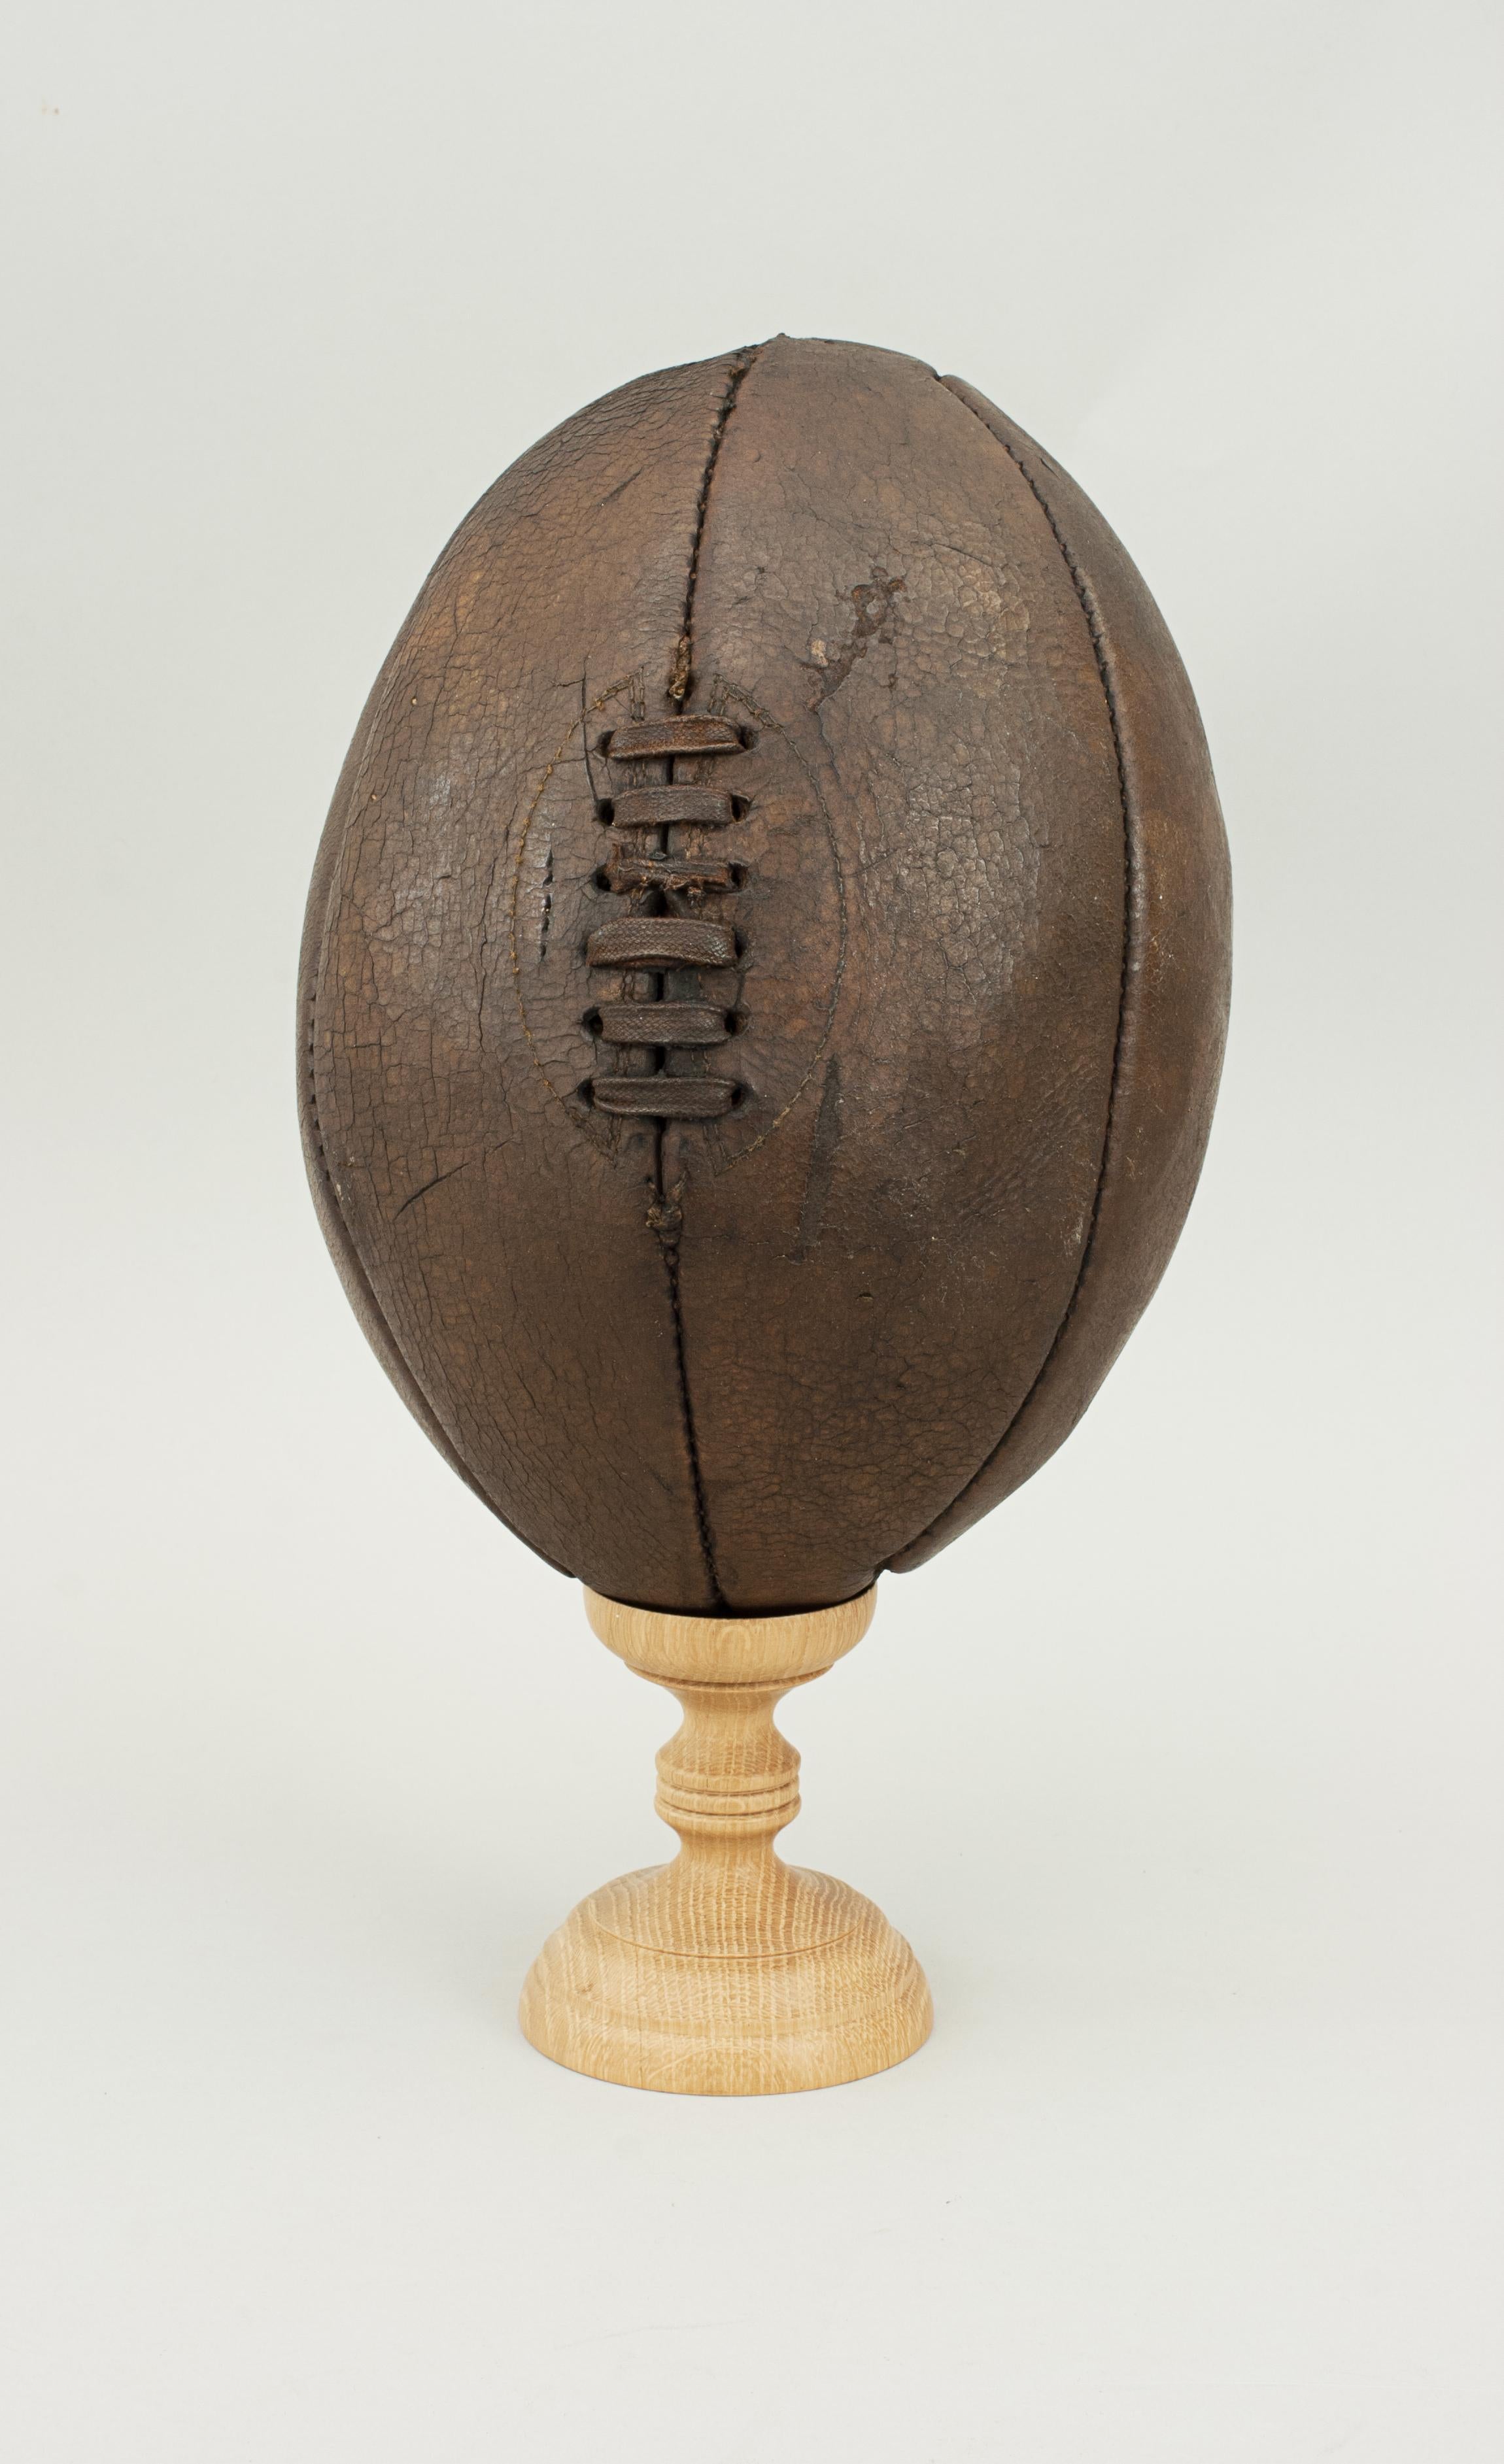 20th Century Original Vintage Leather Rugby Ball with 6 Panels